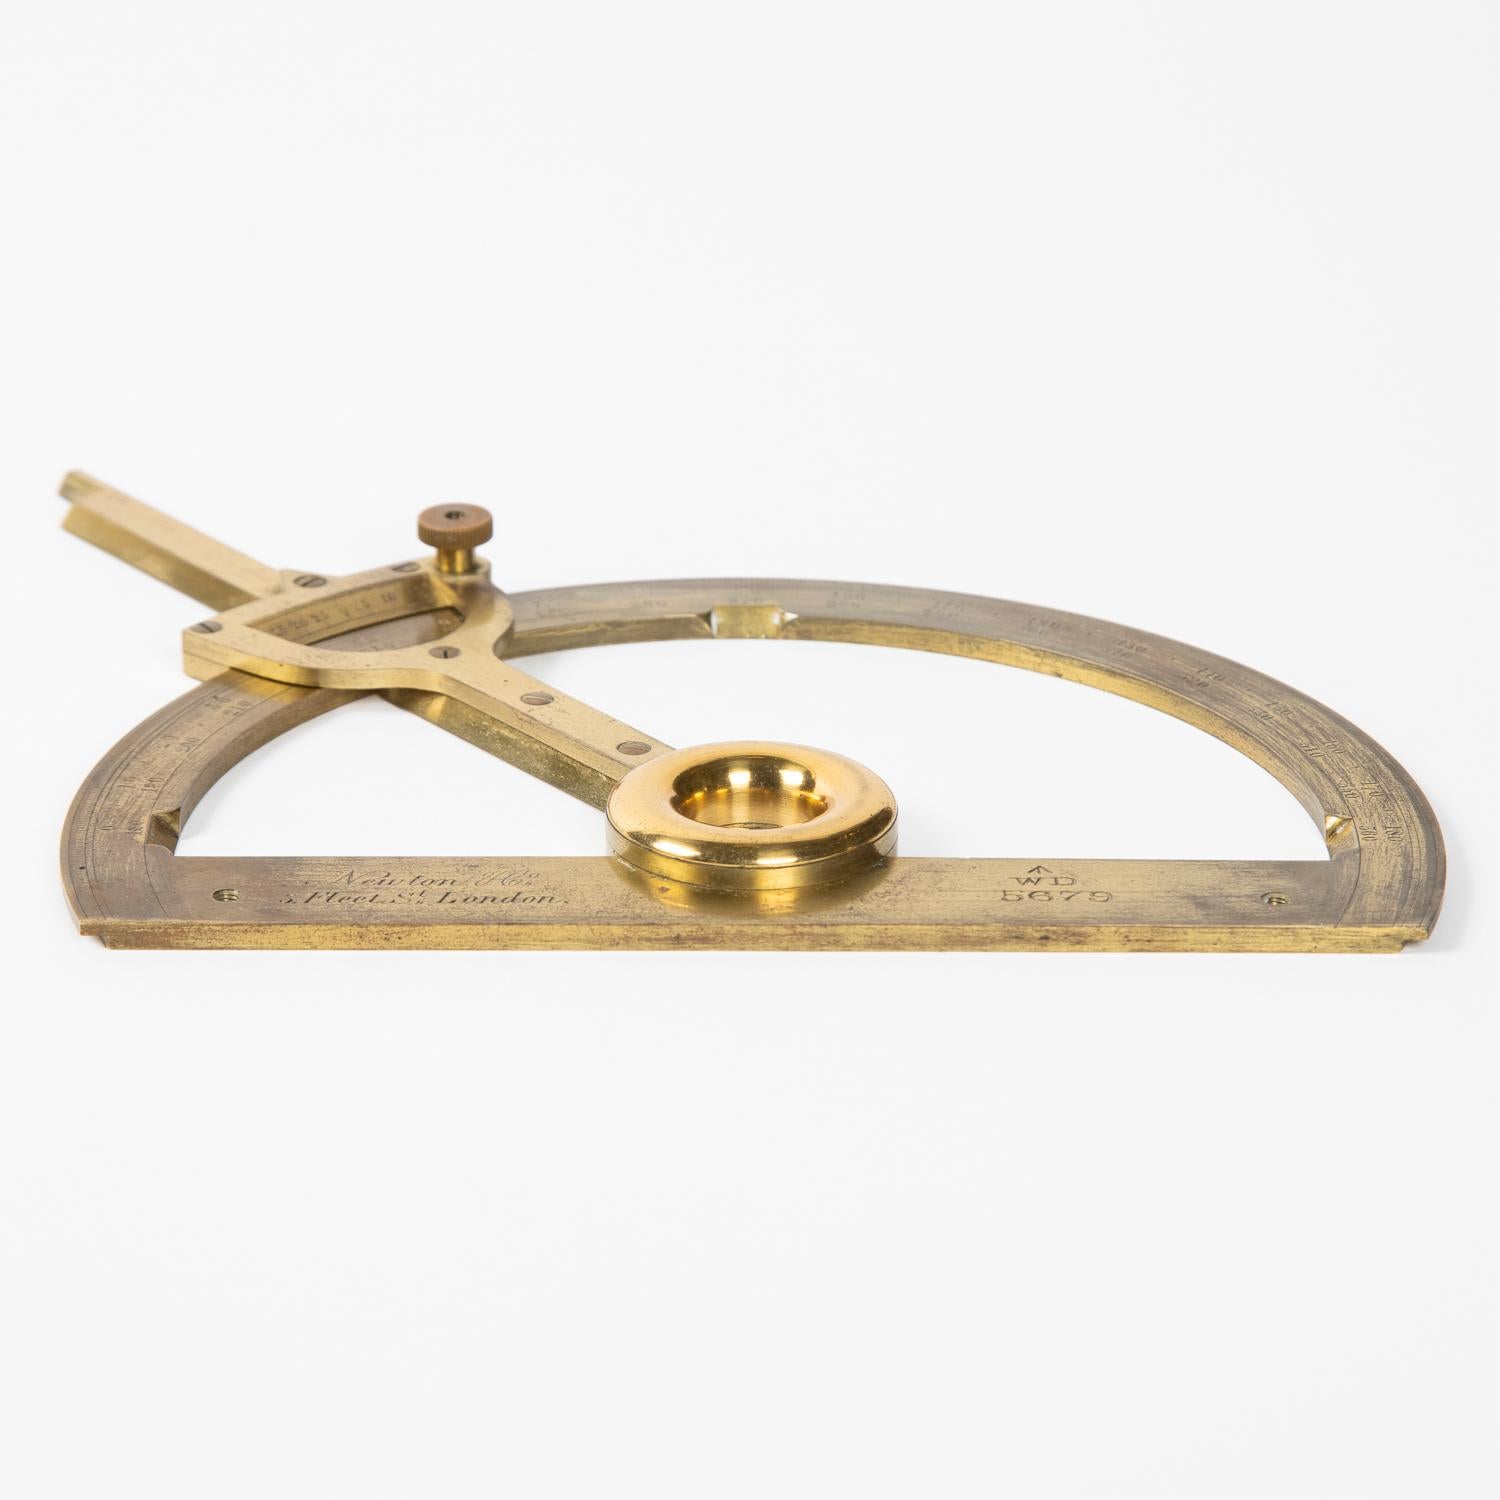 A mid 19th century brass Vernier protractor by Newton & Co of London.

With two screw in fixing points.

Signed: Newton & Co 3, Fleet St, London

Marked with Broad-Arrow: WD 5679.